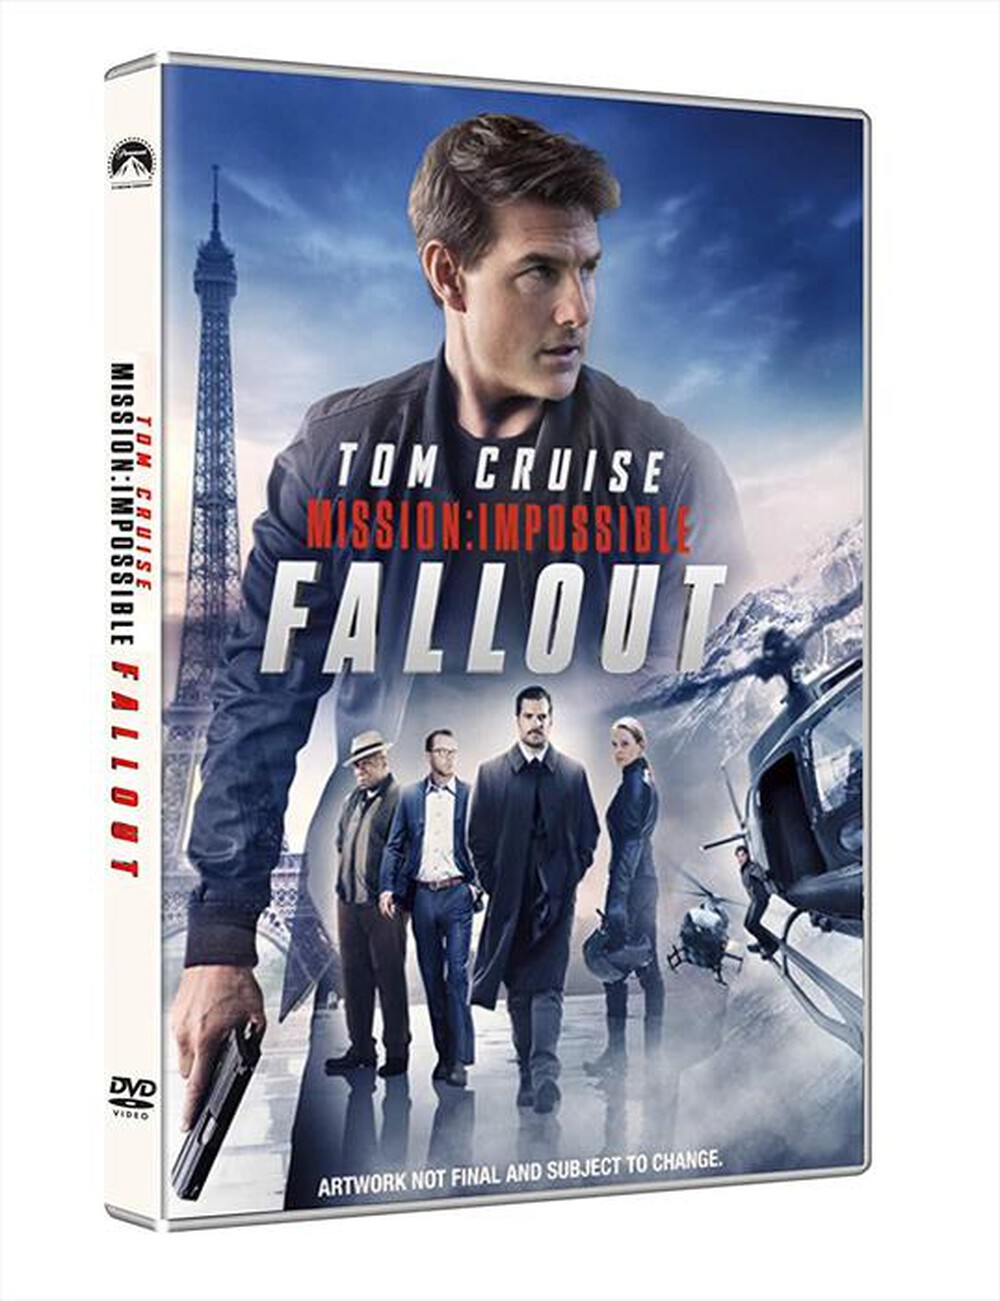 "UNIVERSAL PICTURES - Mission Impossible - Fallout"